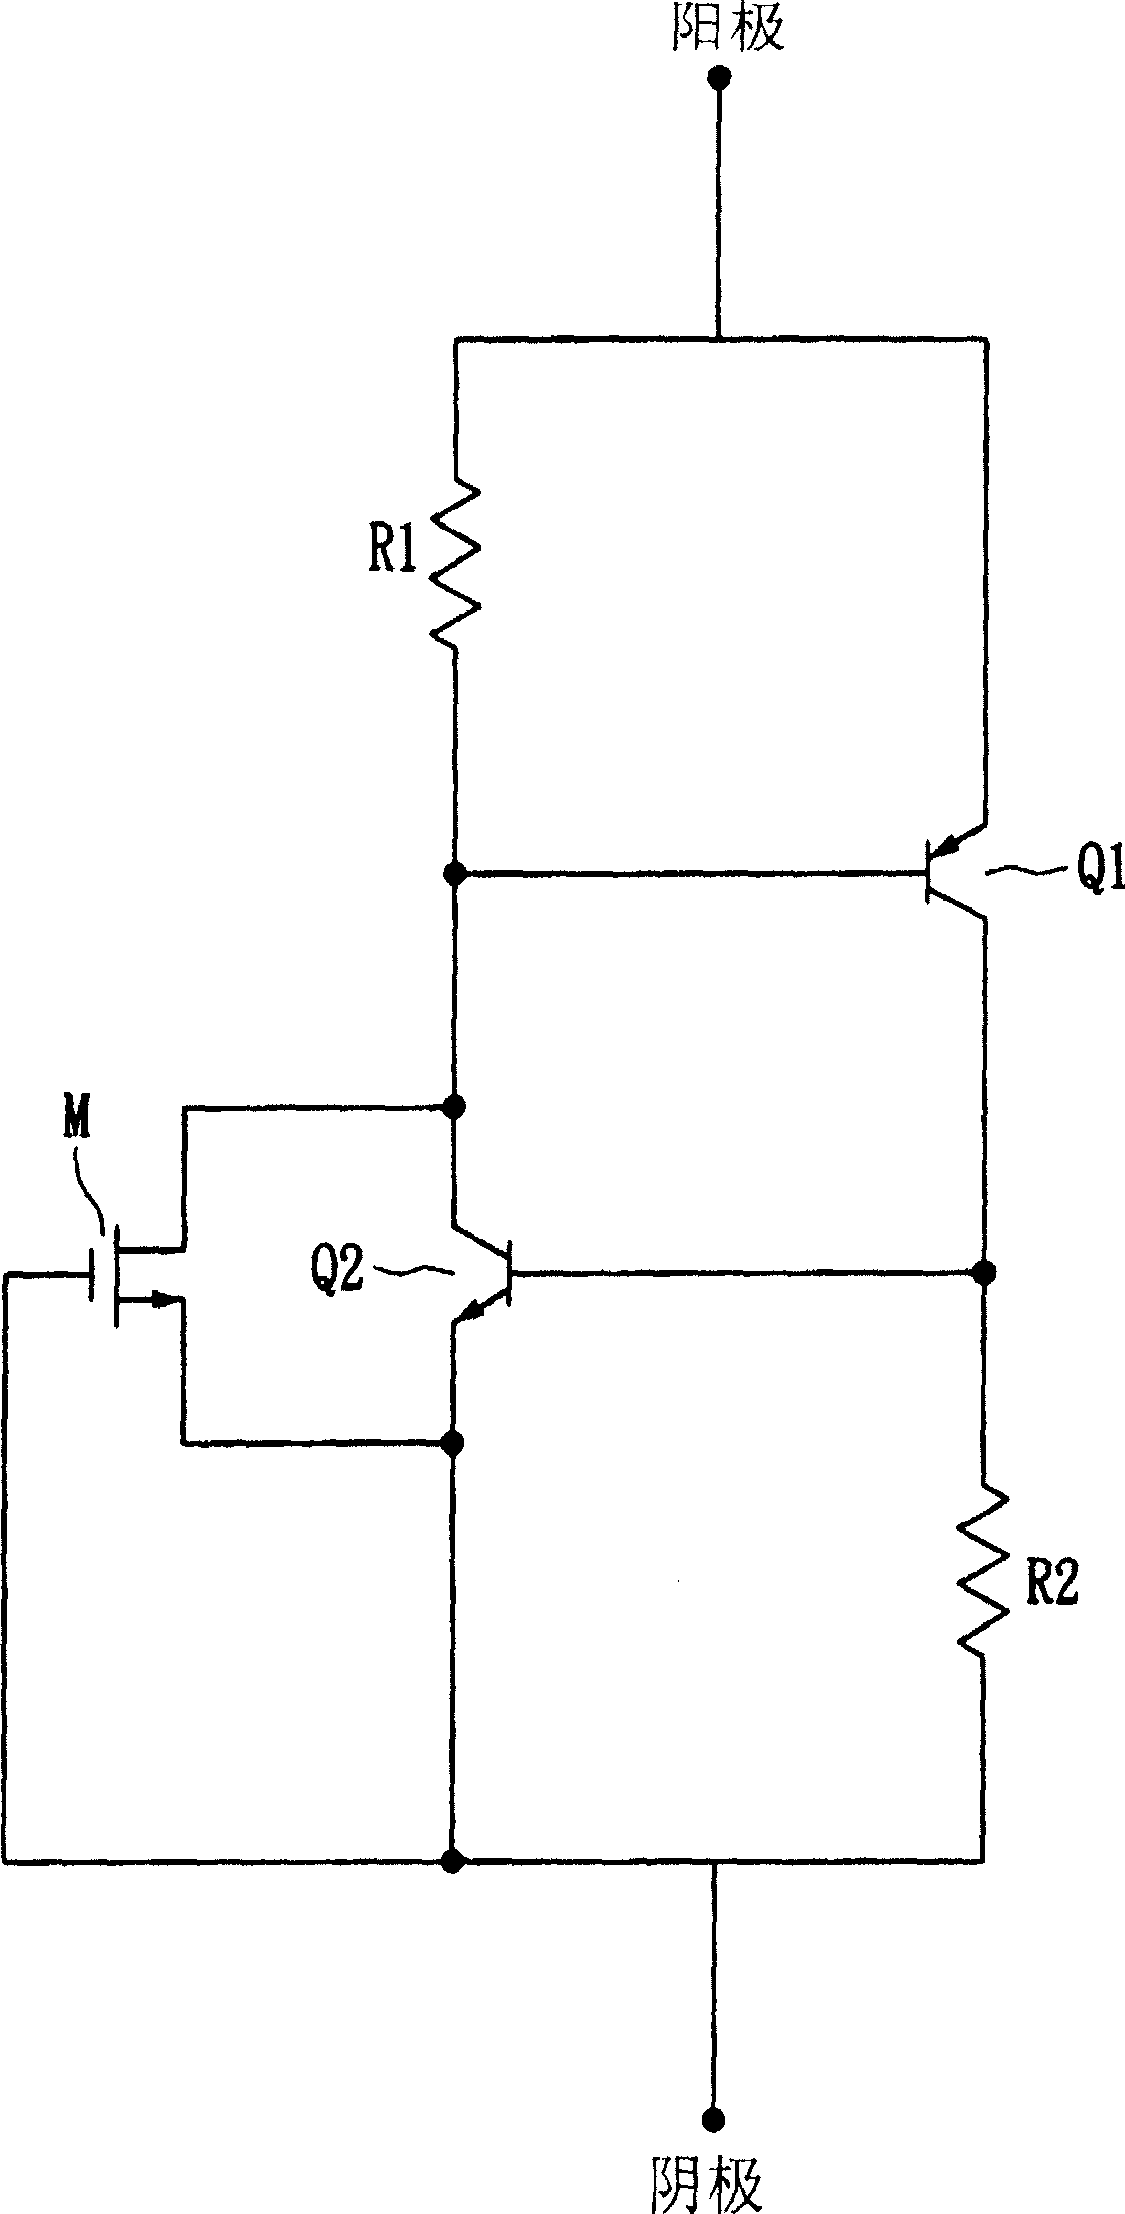 Low trigger voltage silicon control rectifier and its circuit